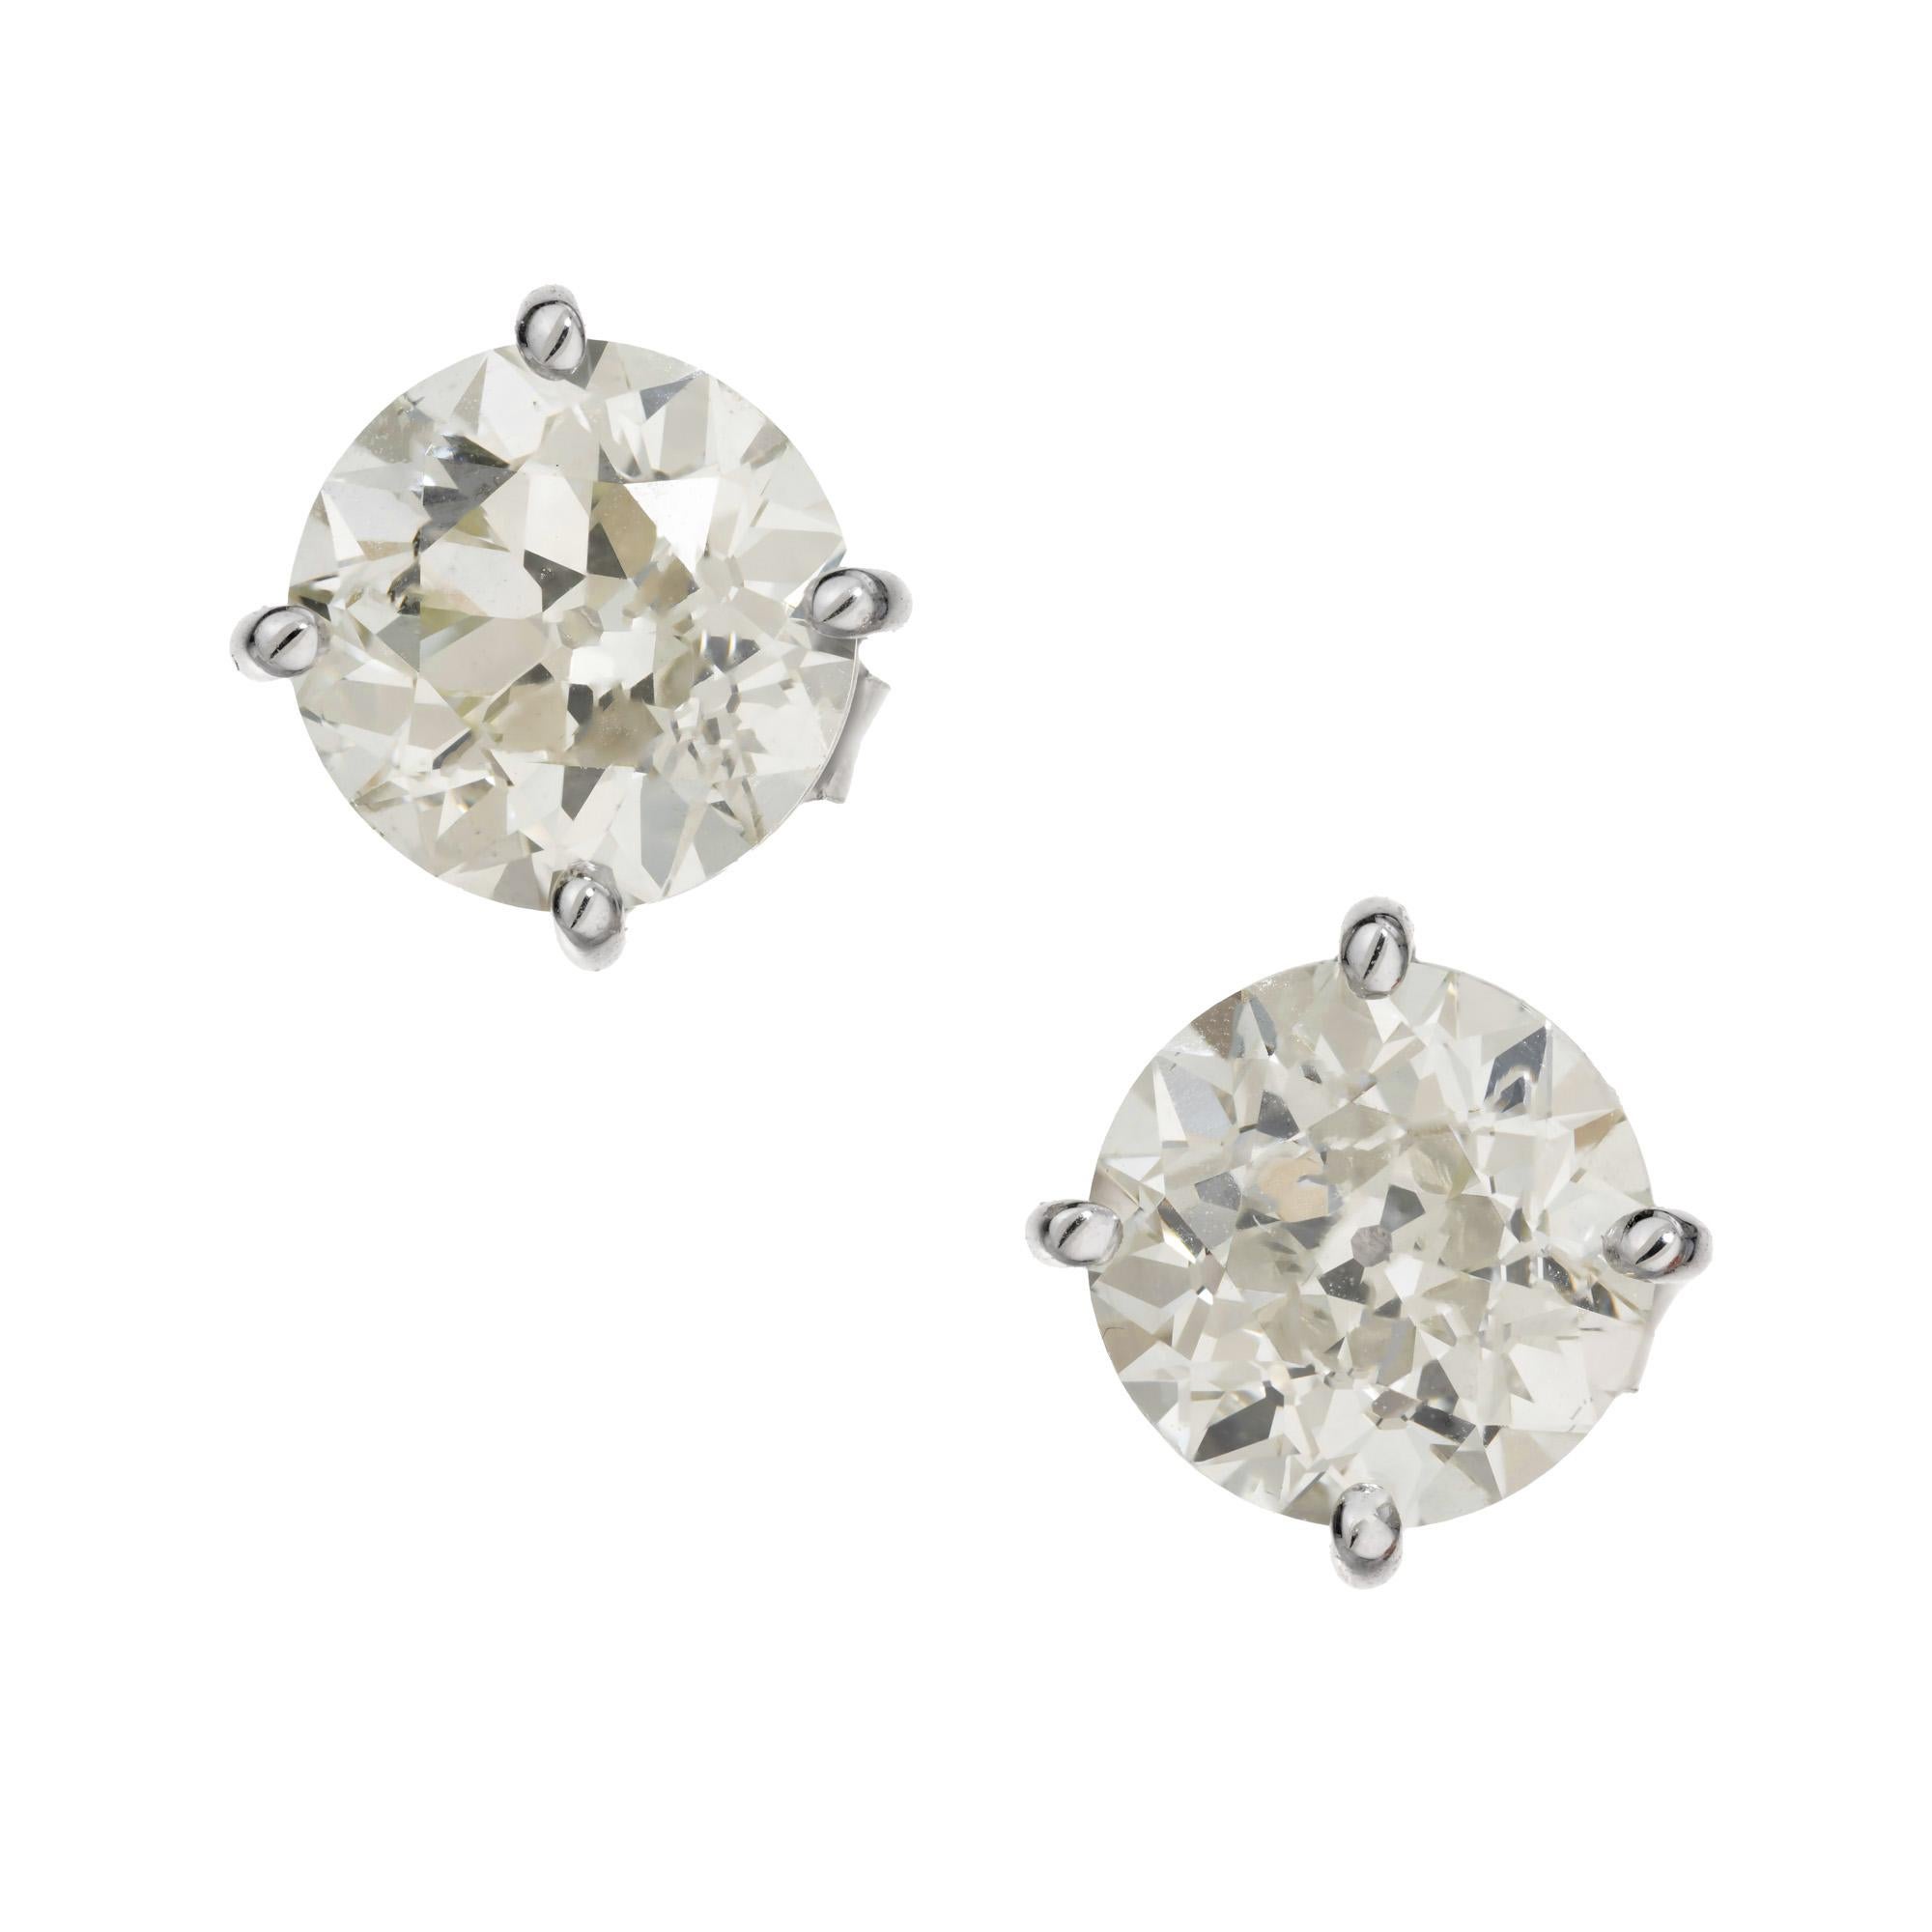 Well matched diamond stud earrings. 1 Old Euro cut 1.58ct diamond with a well matched round brilliant cut 1.59ct diamond, both are set in a simple four prong platinum basket setting. They are also each certified by the GIA. 

1 old Euro cut diamond,